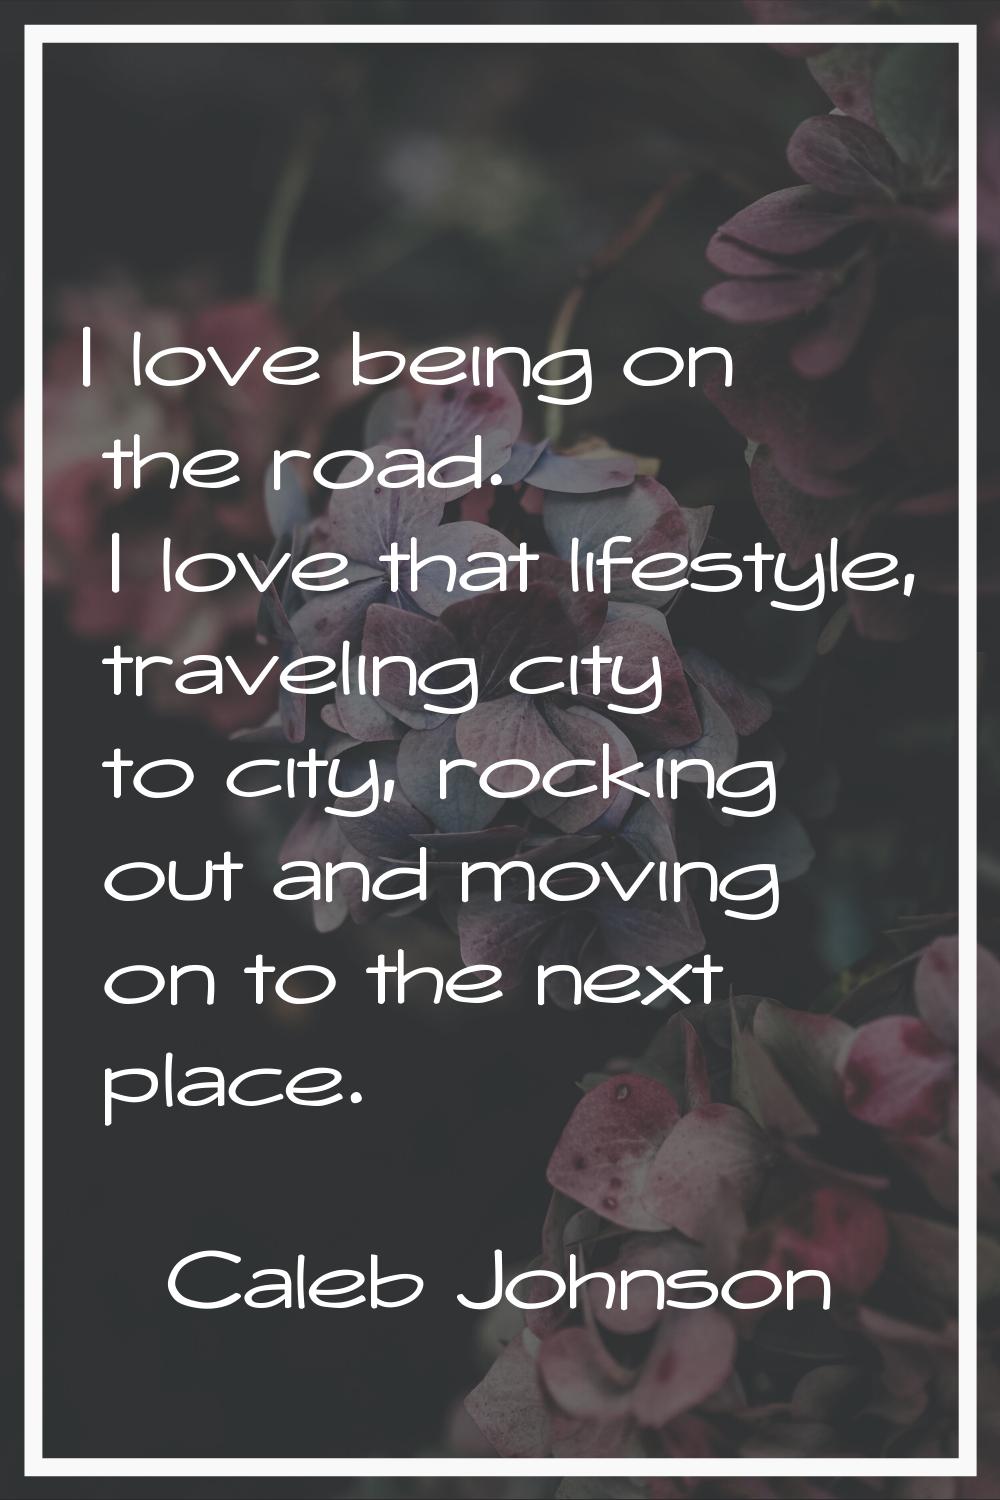 I love being on the road. I love that lifestyle, traveling city to city, rocking out and moving on 